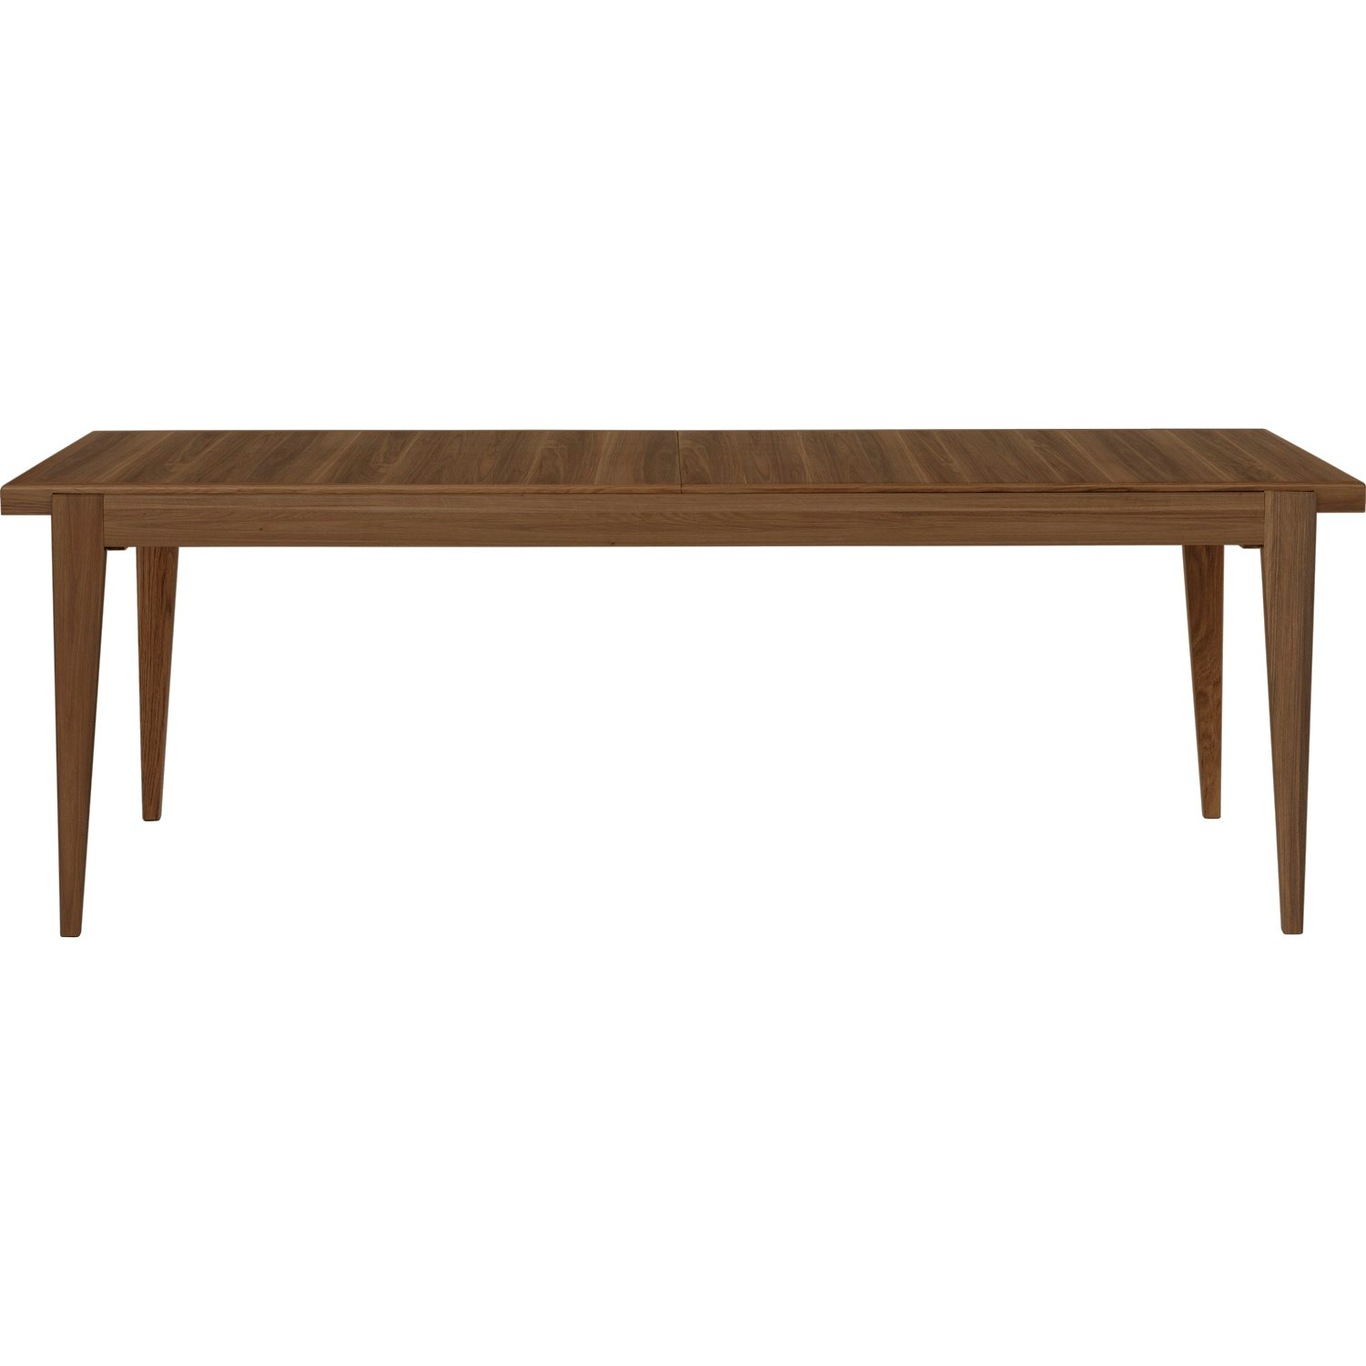 S-Table Dining Table Extendable 95x220 cm, Walnut